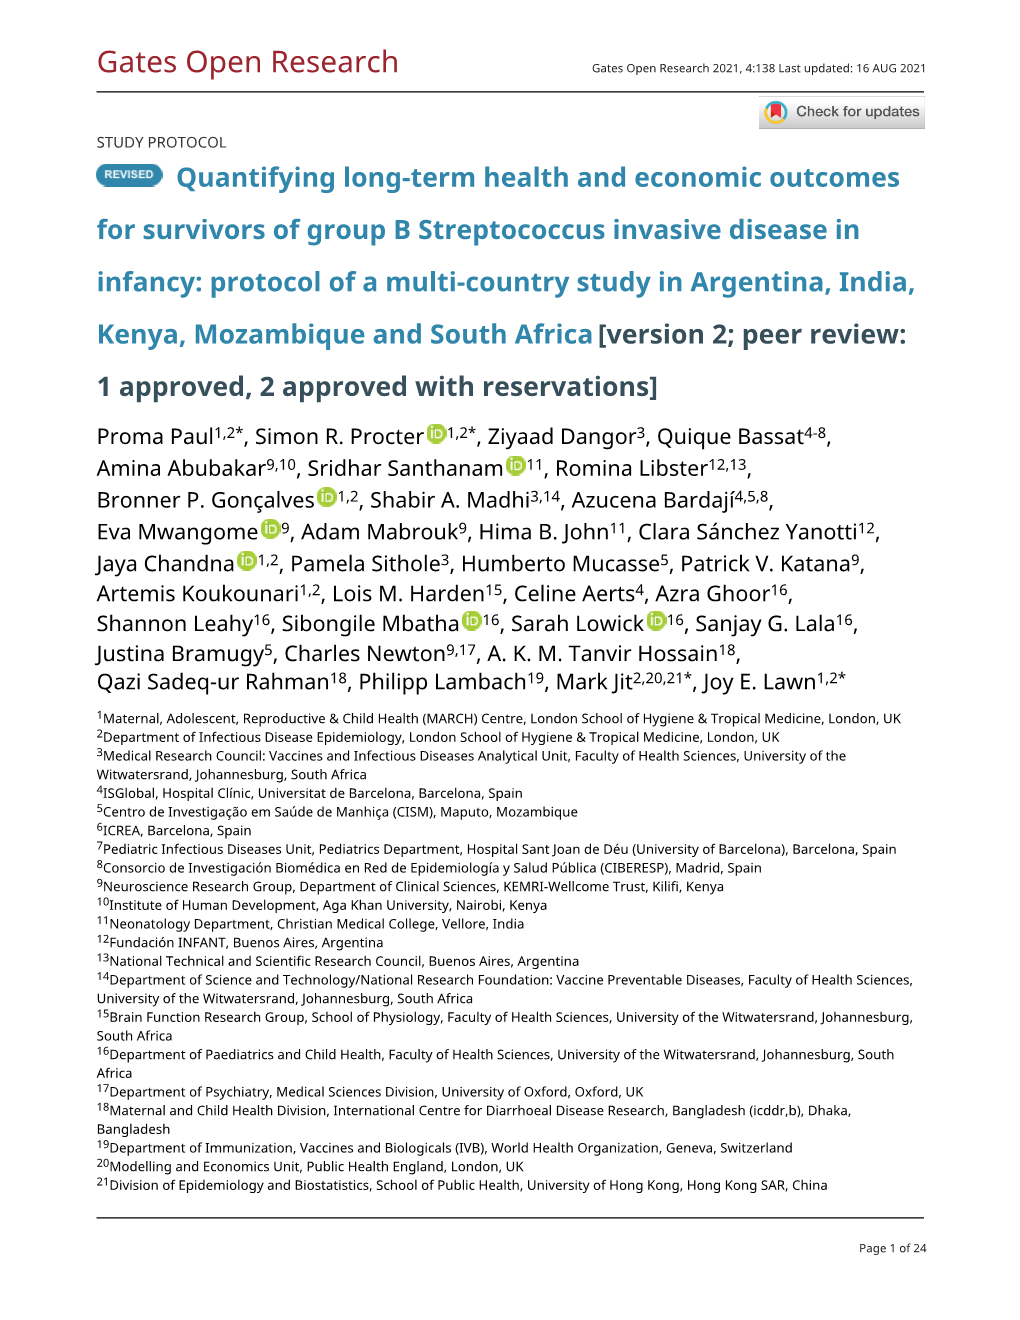 Quantifying Long-Term Health and Economic Outcomes for Survivors of Group B Streptococcus Invasive Disease in Infancy: Protocol of a Multi-Country Study in Argentina, India, Kenya